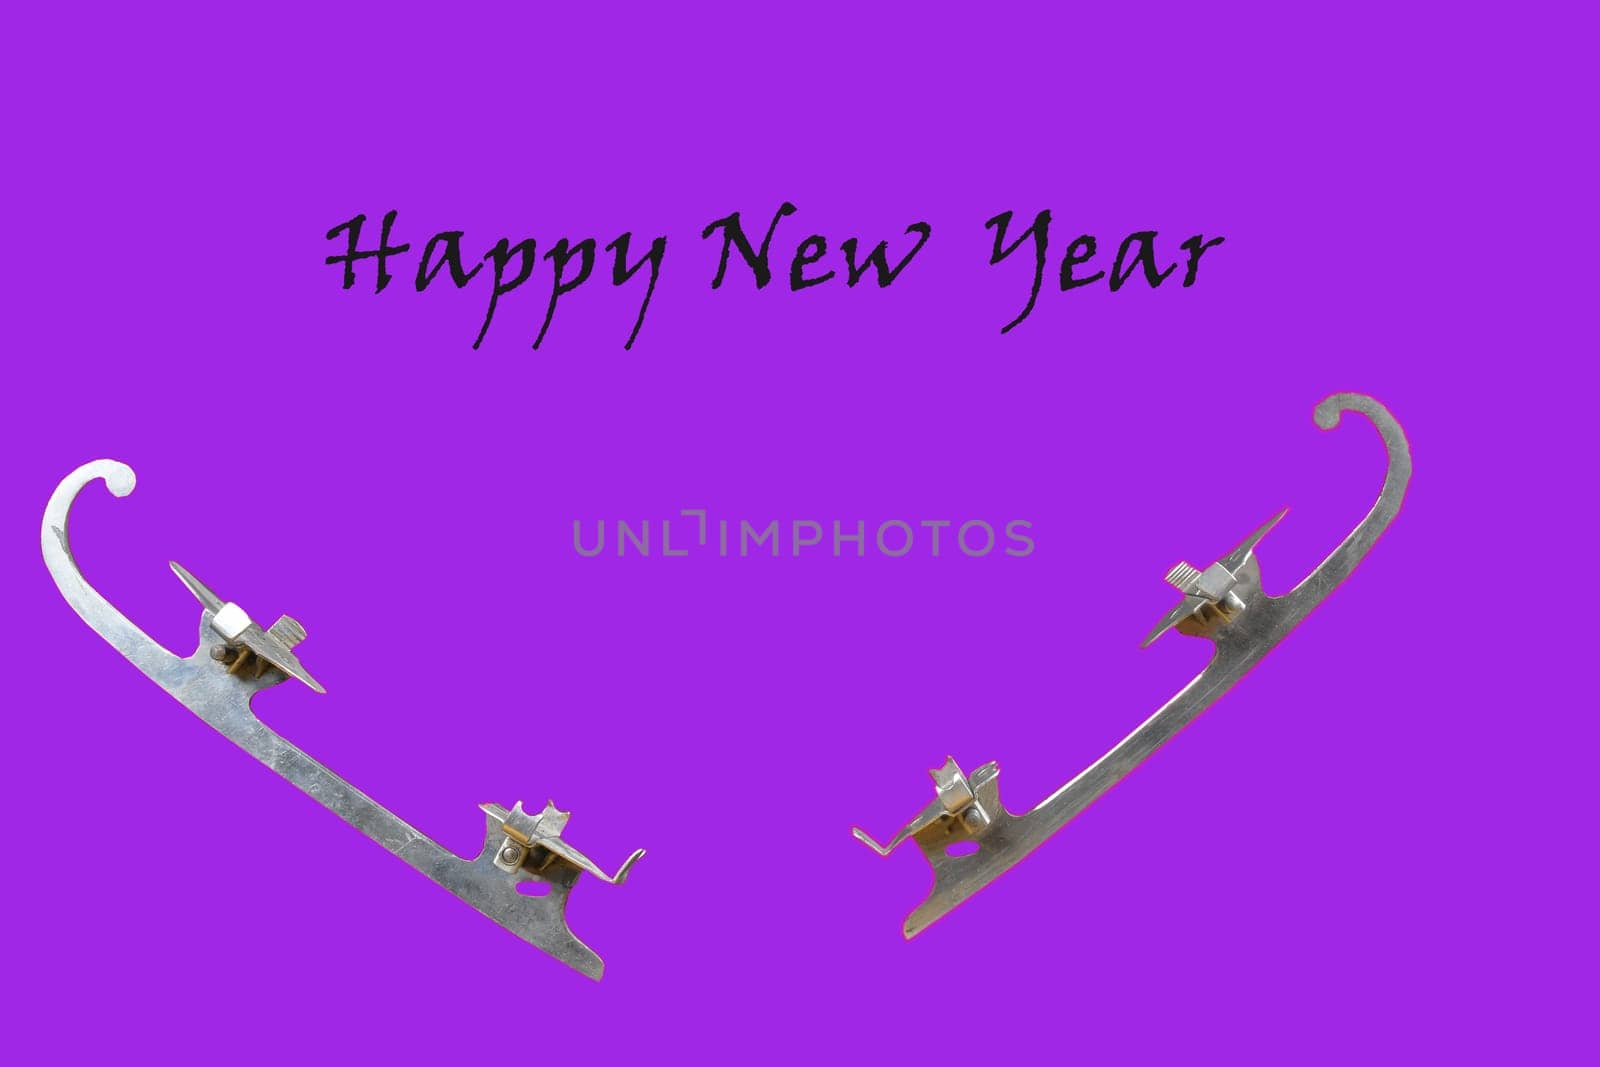 Vintage ice-skate on violet background. Text - Happy New Year. Copy space.